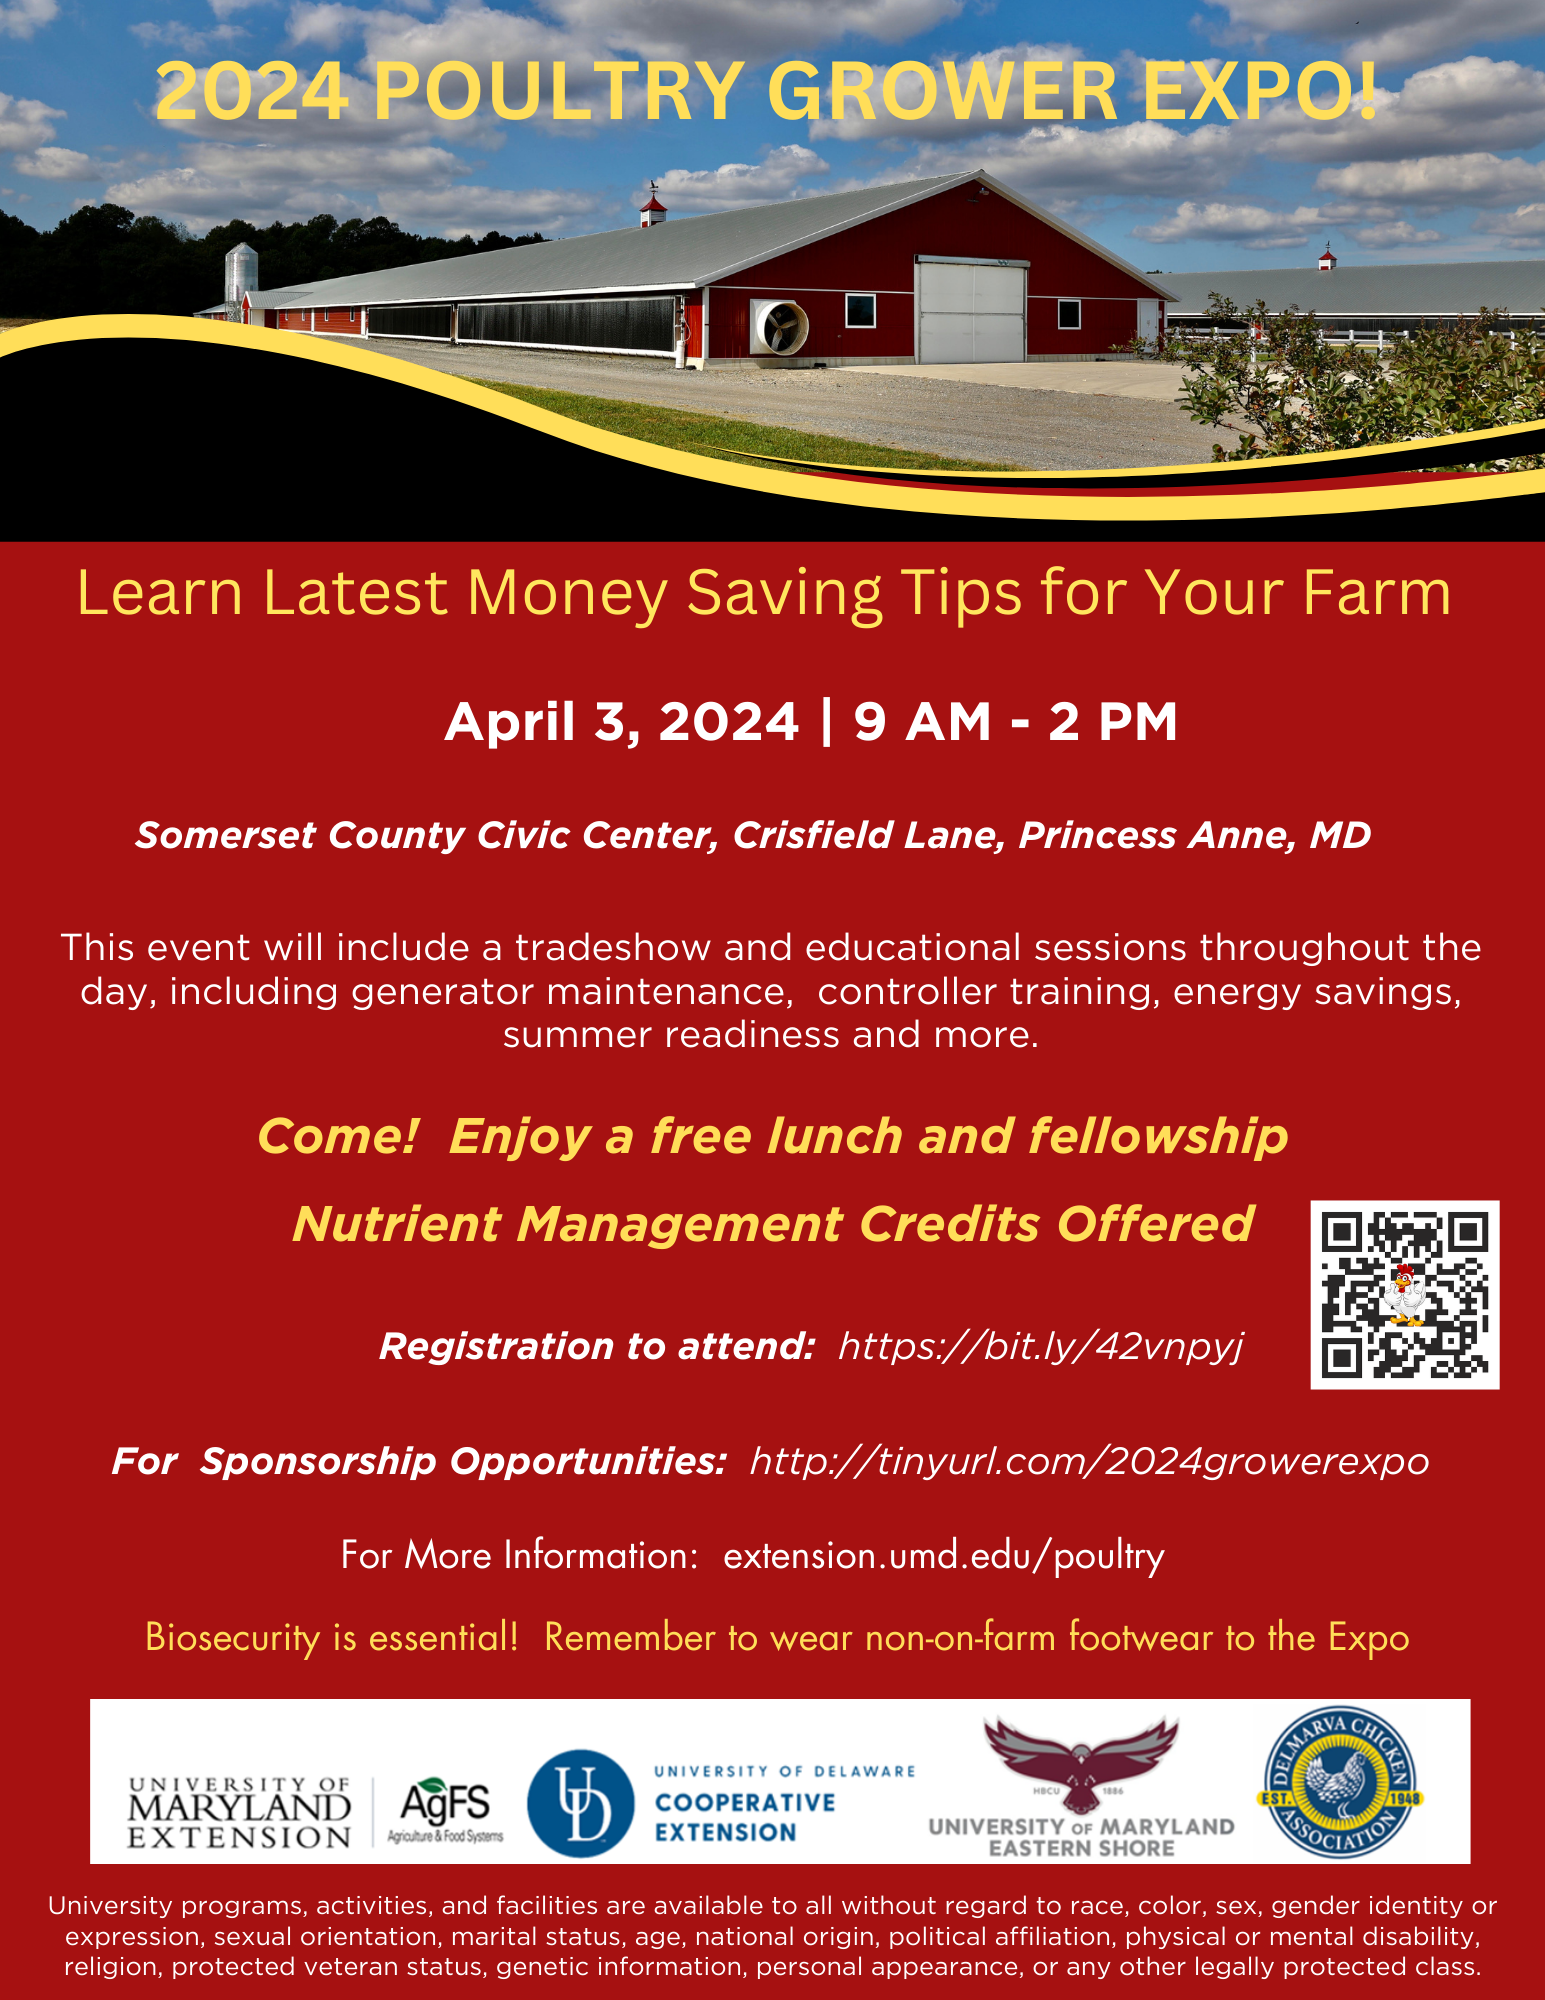 Flyer for 2024 Poultry Grower Expo - April 3, 2024